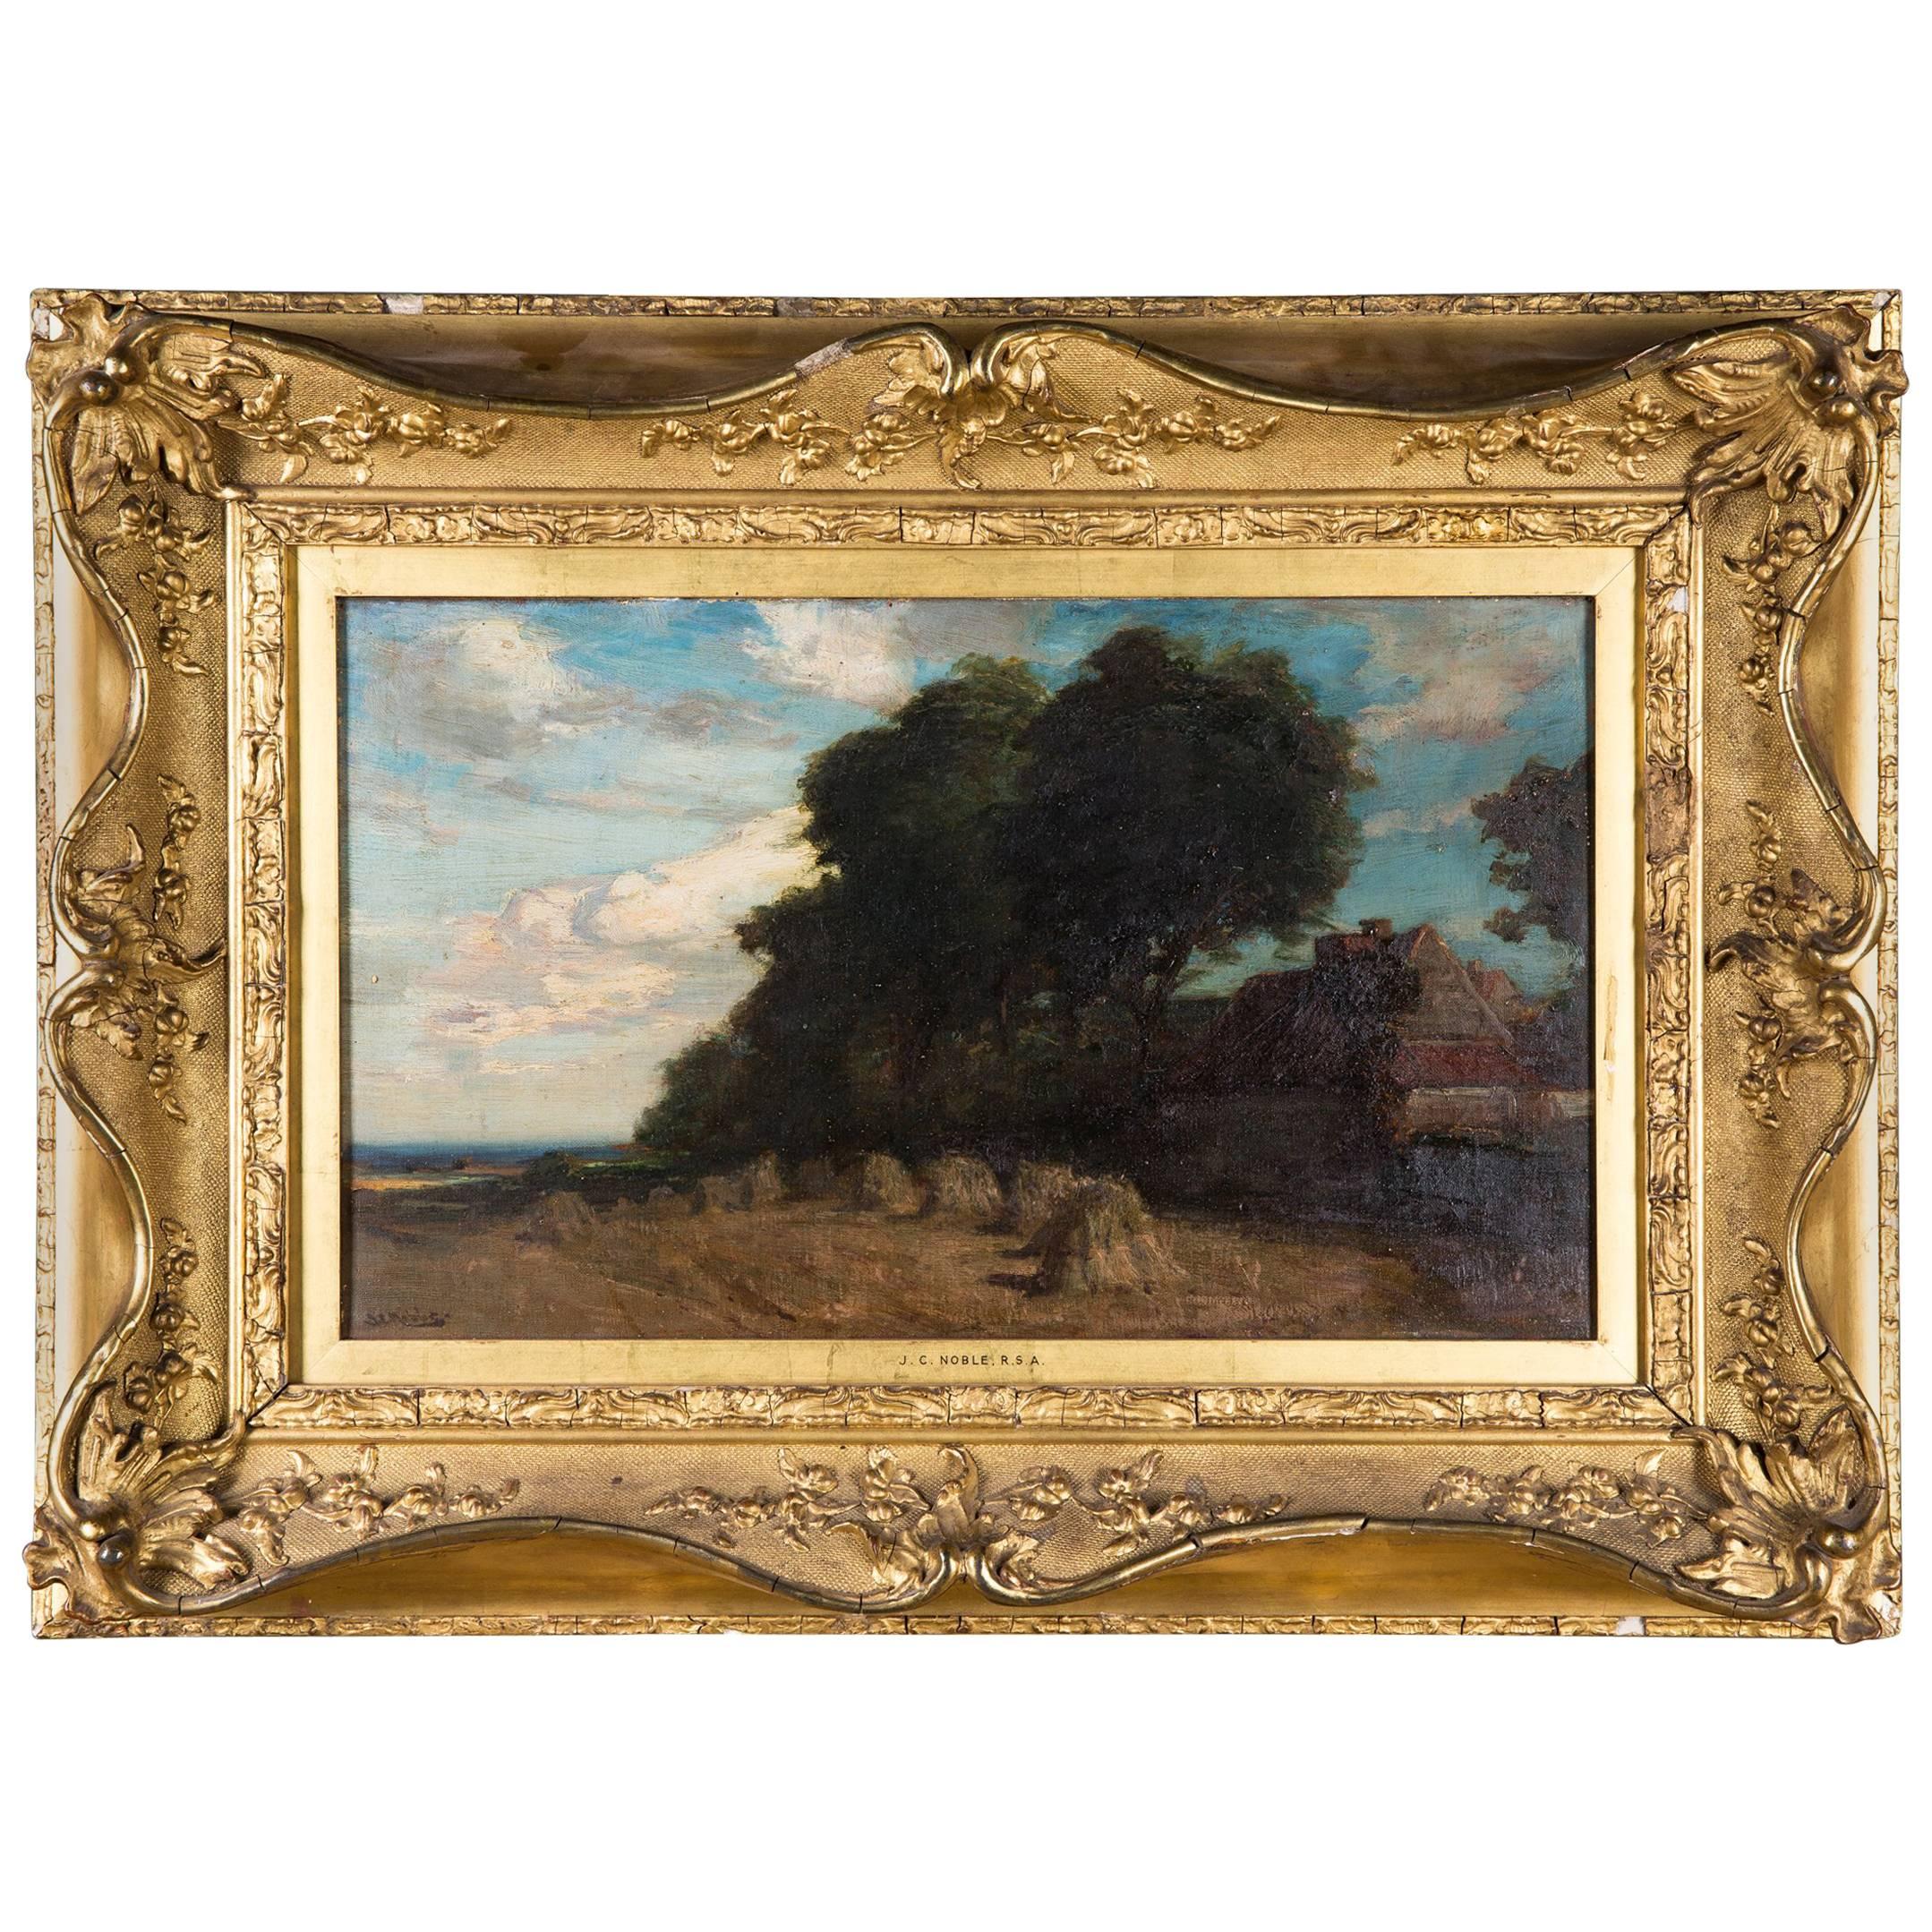 Original Oil Painting Landscape by James Campbell, 1846-1913